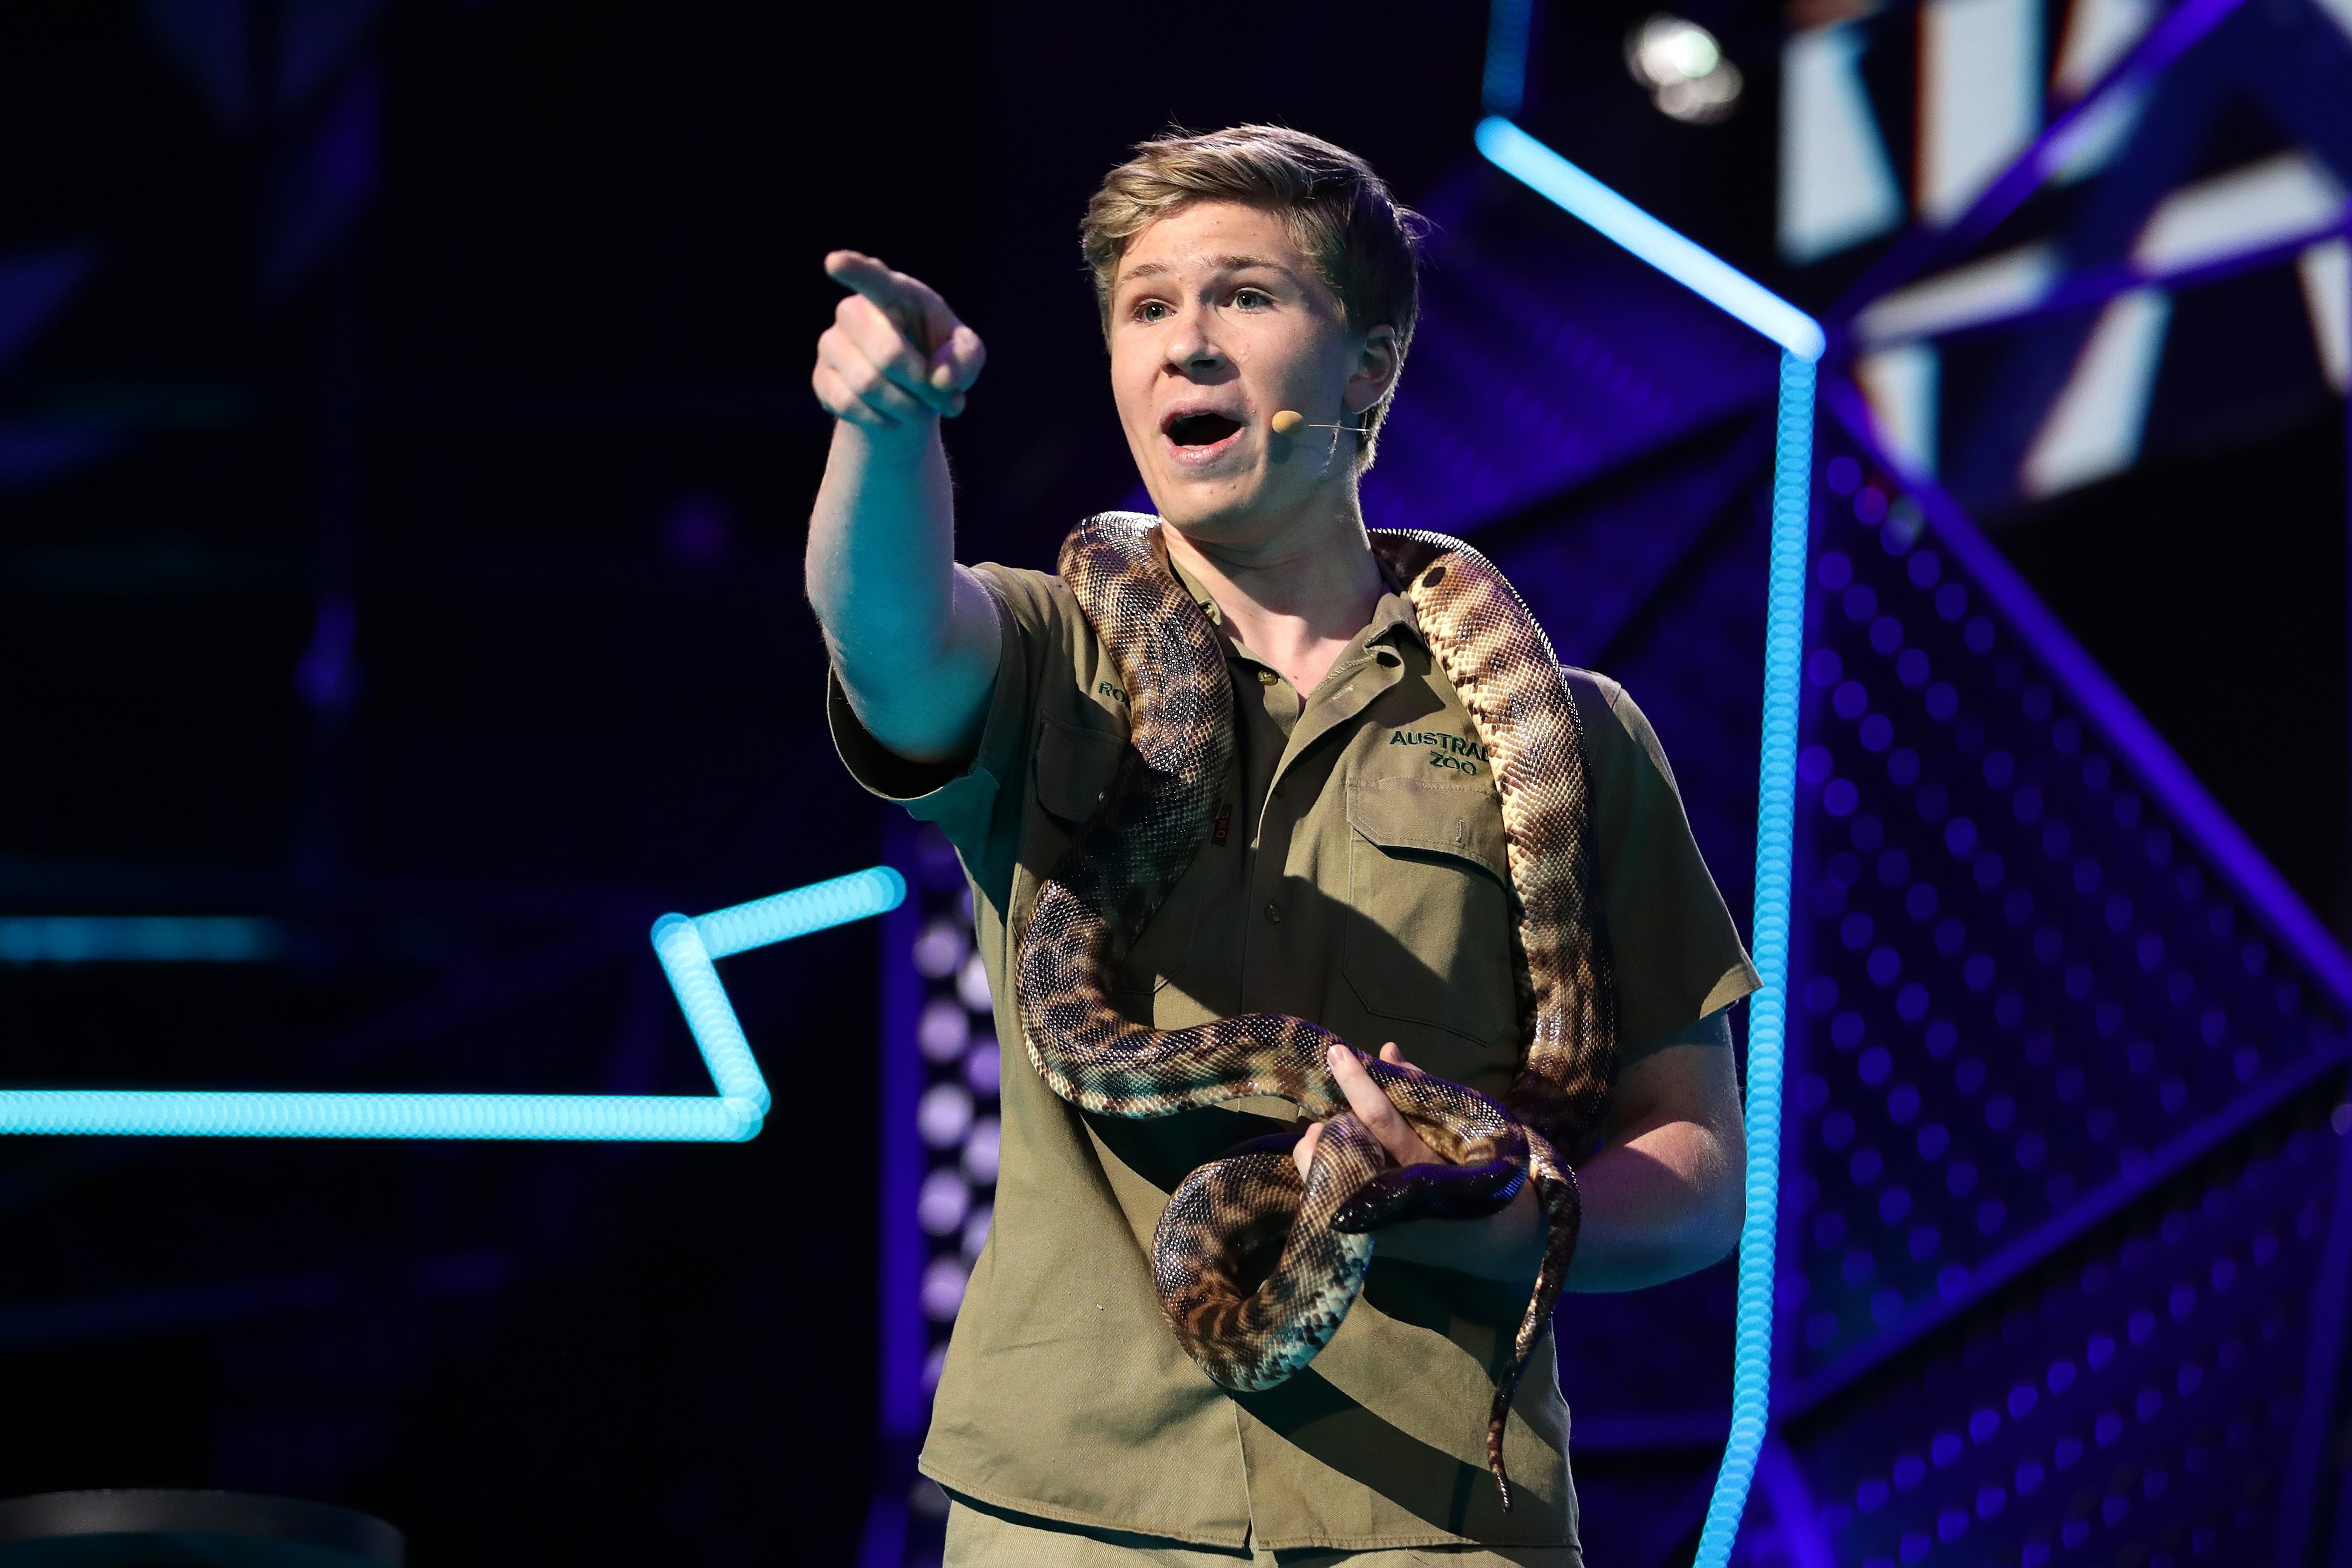  Robert Irwin during the 33rd Annual ARIA Awards 2019 at The Star on November 27, 2019 | Photo: Getty Images